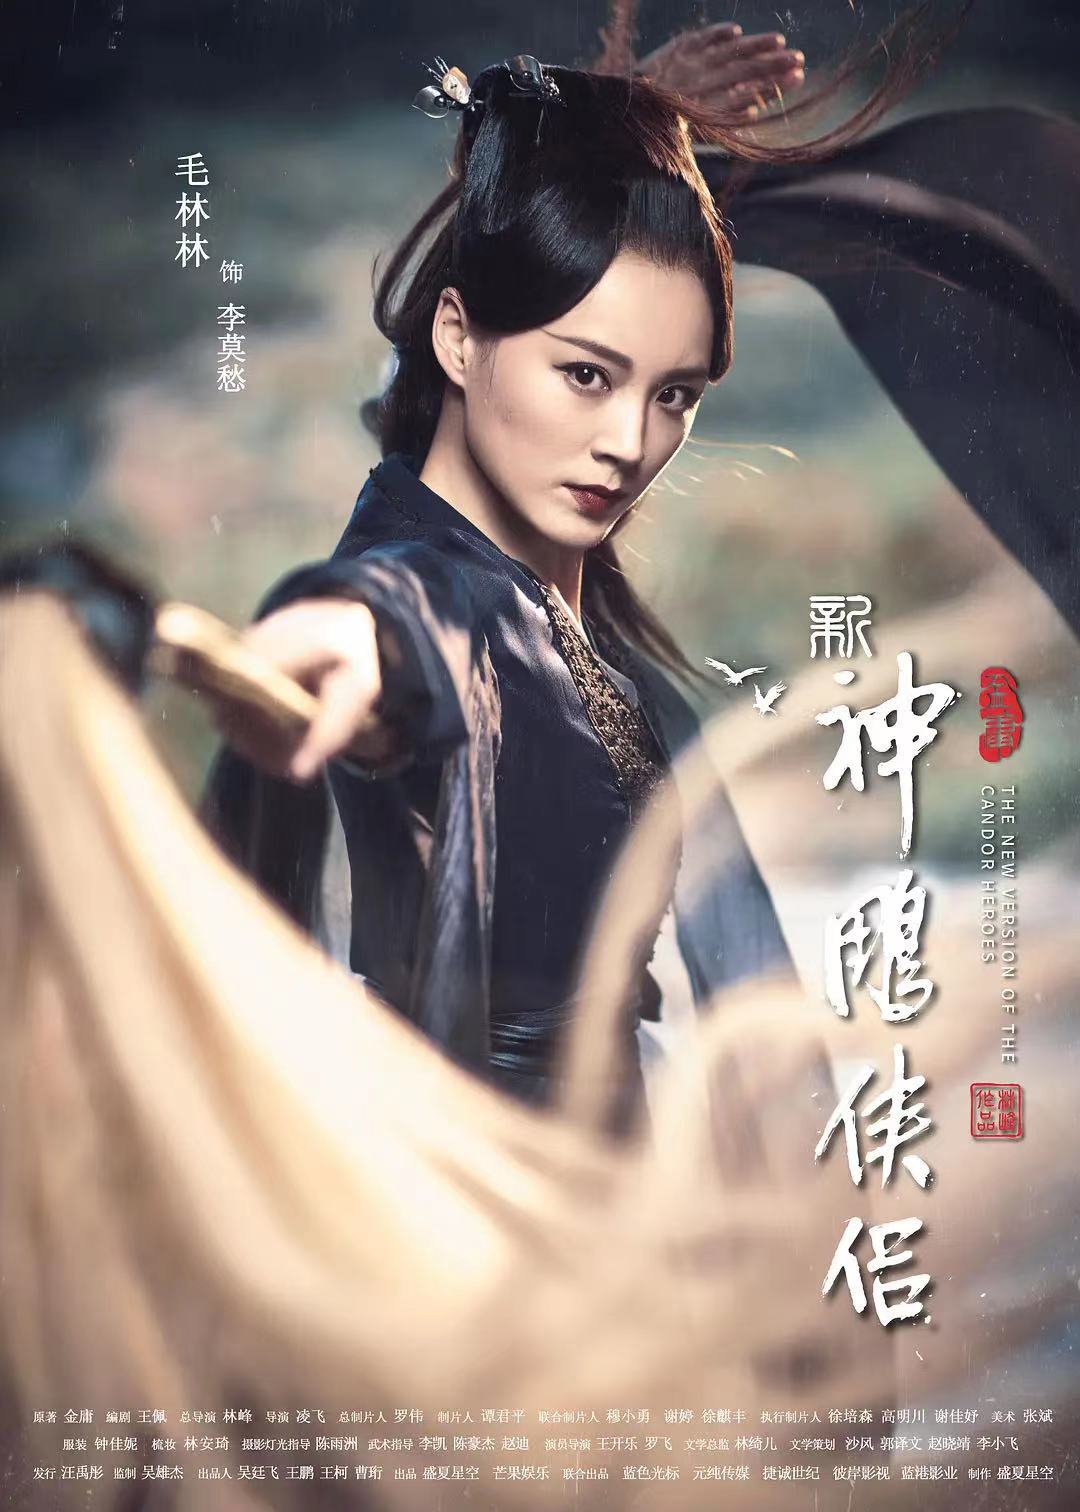 New Condor Heroes Little Dragon Girl Is Spit Out And Has No Energy Li Mochous Face Is Too 